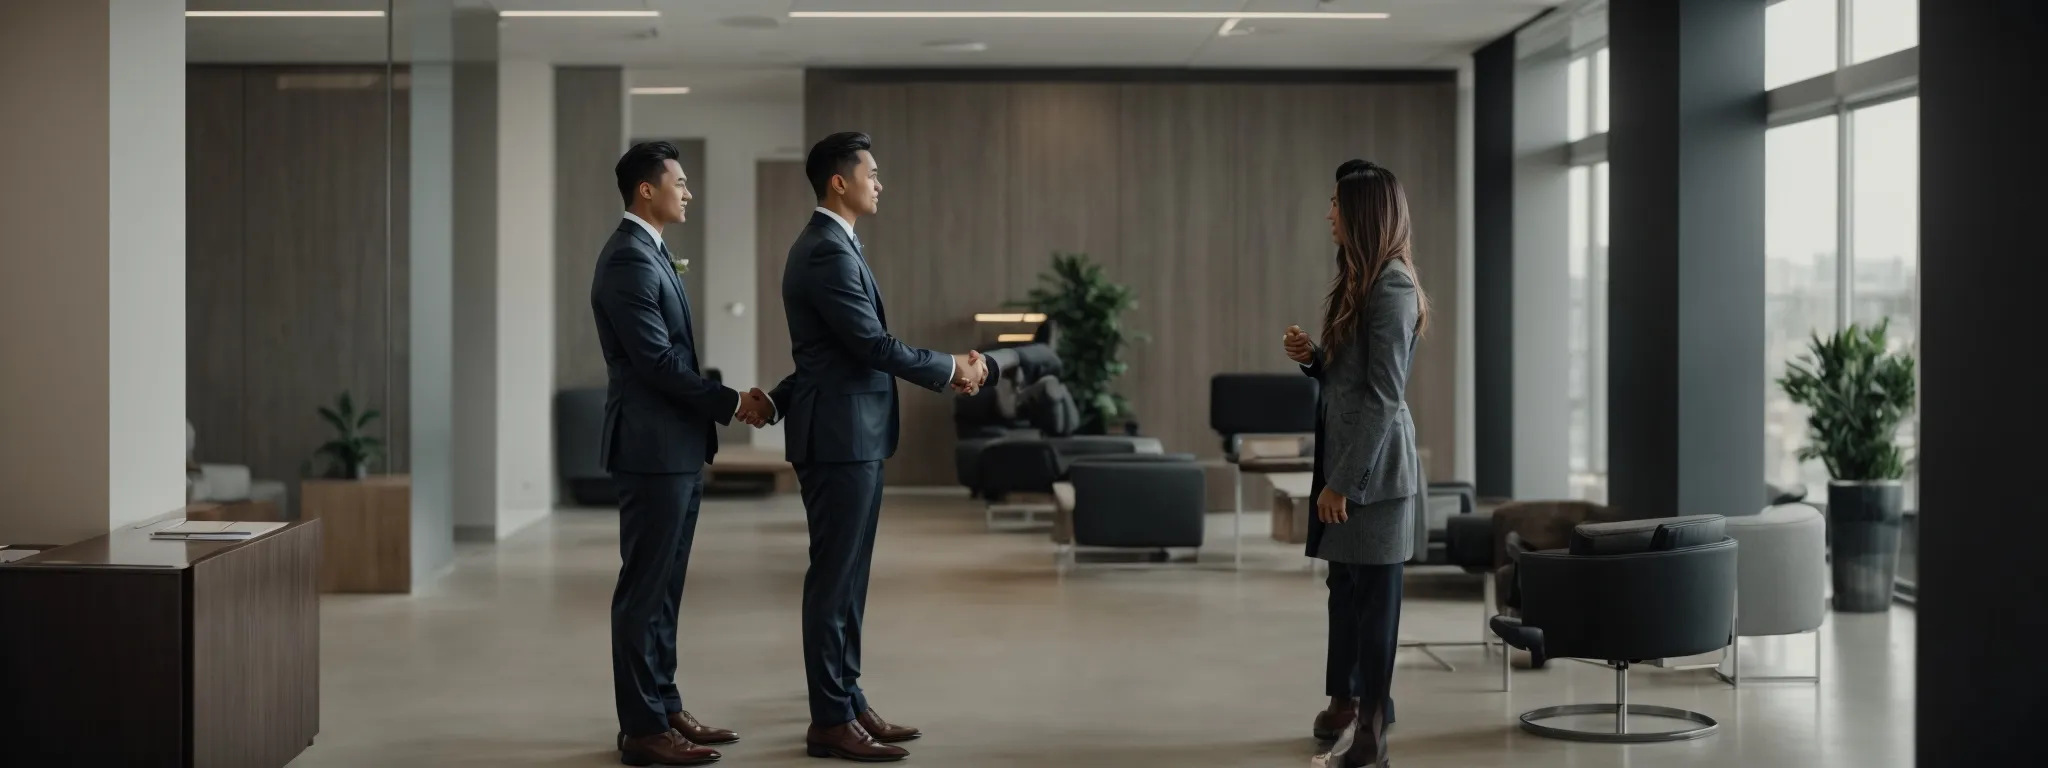 two professionals shaking hands in a sleek, modern office, symbolizing a successful partnership.